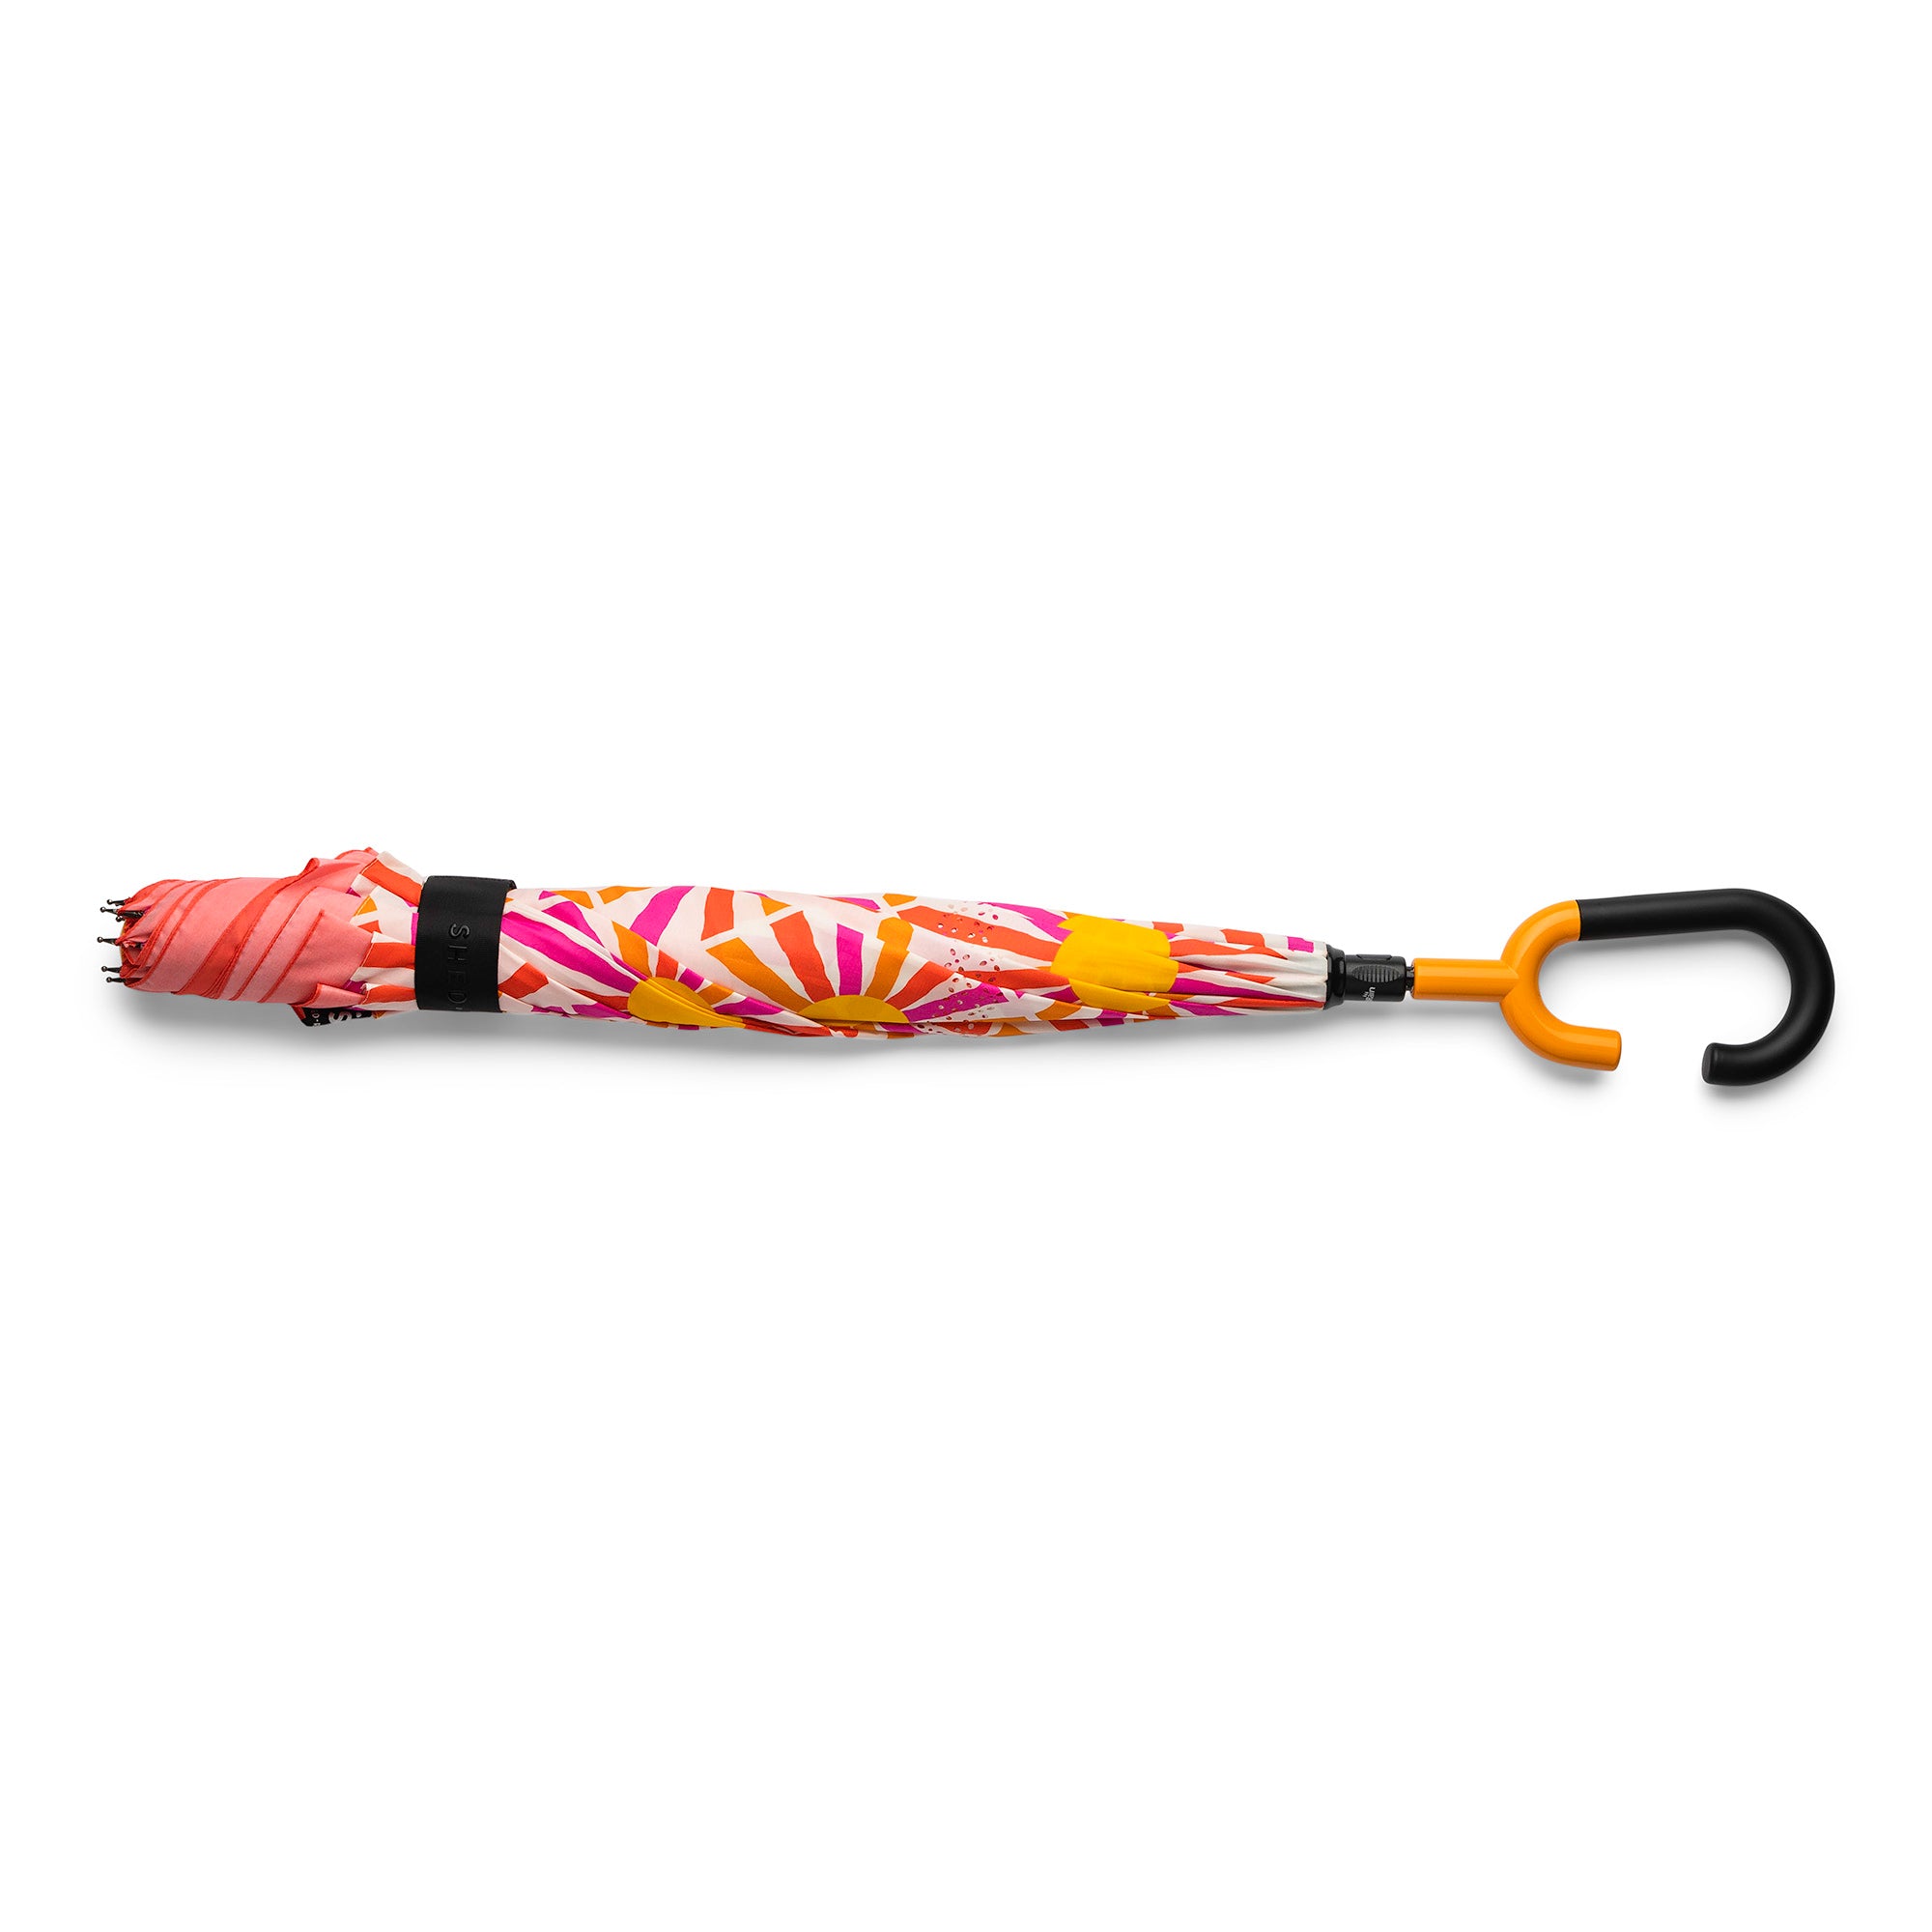 Reverse Closing Stick Umbrella in Coral (top) and Sunny (bottom) - 3274